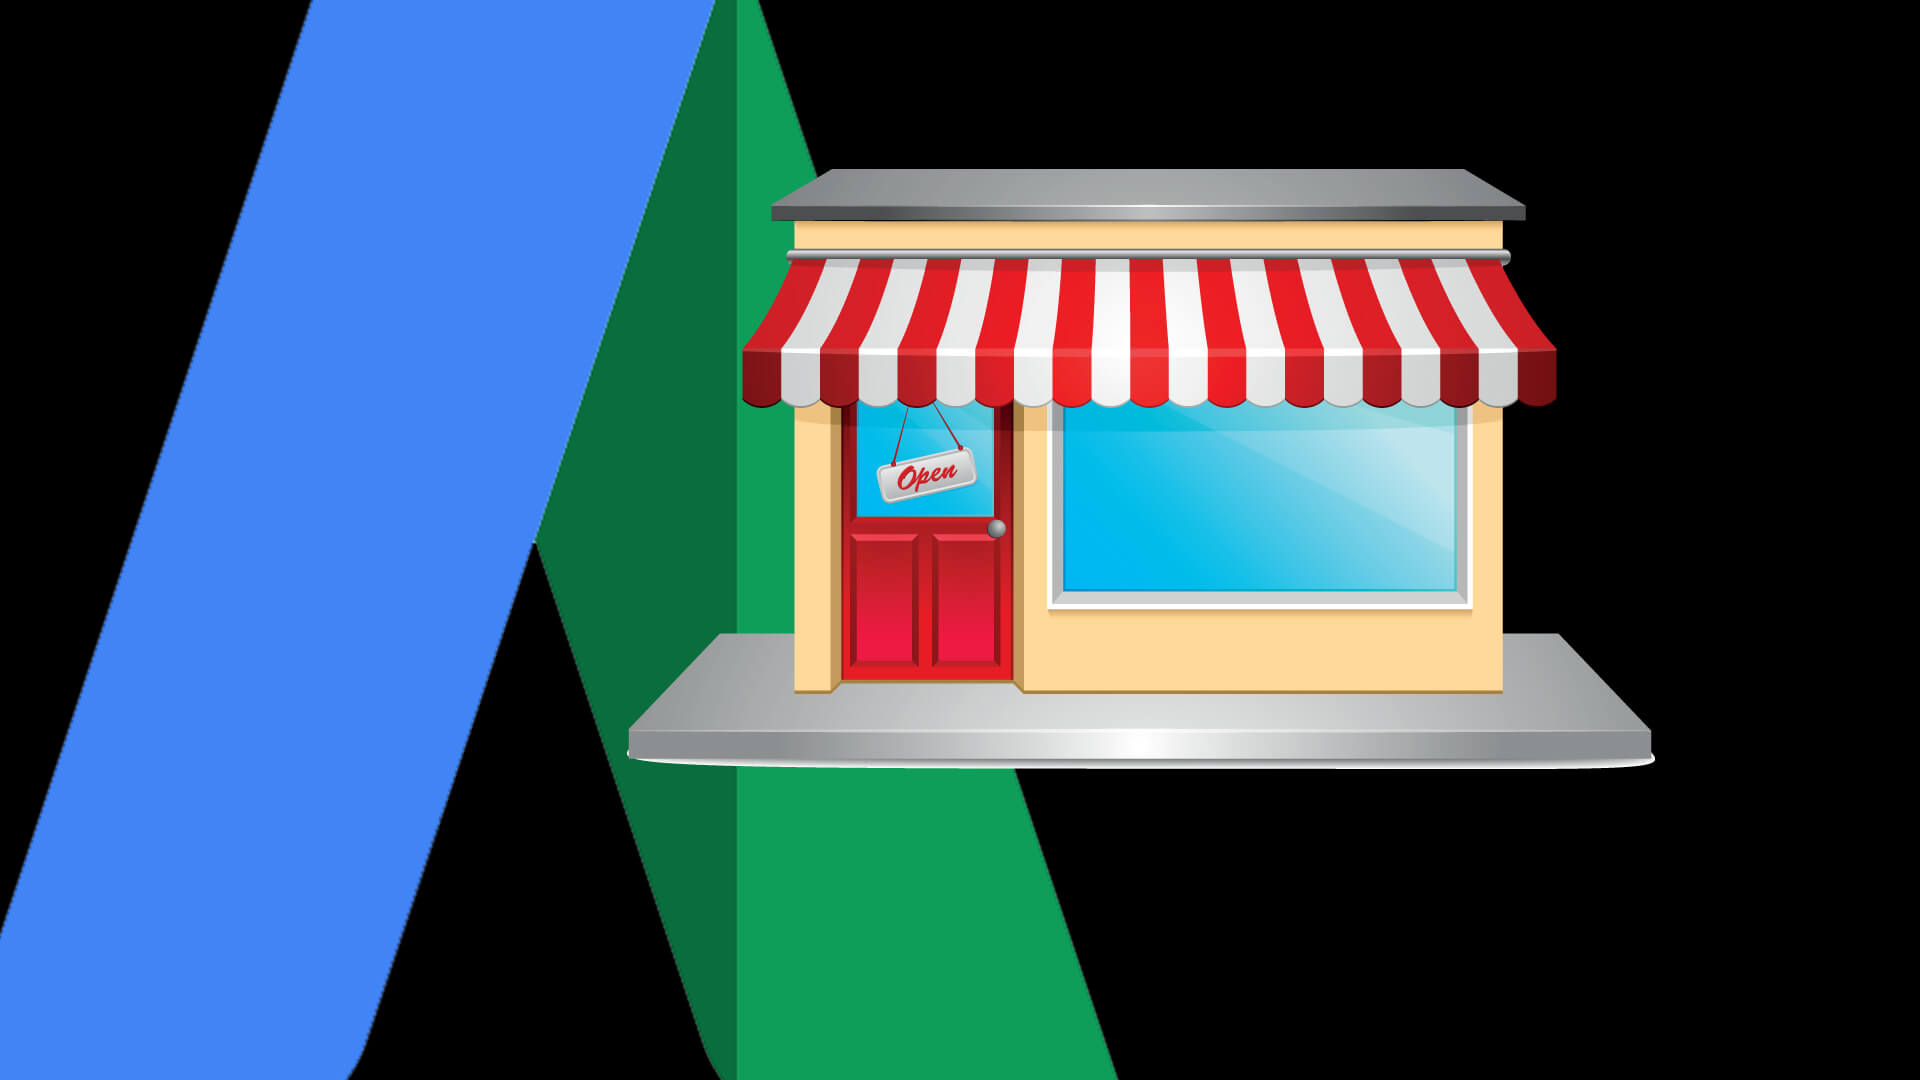 google-adwords-store-small-business4-ss-1920